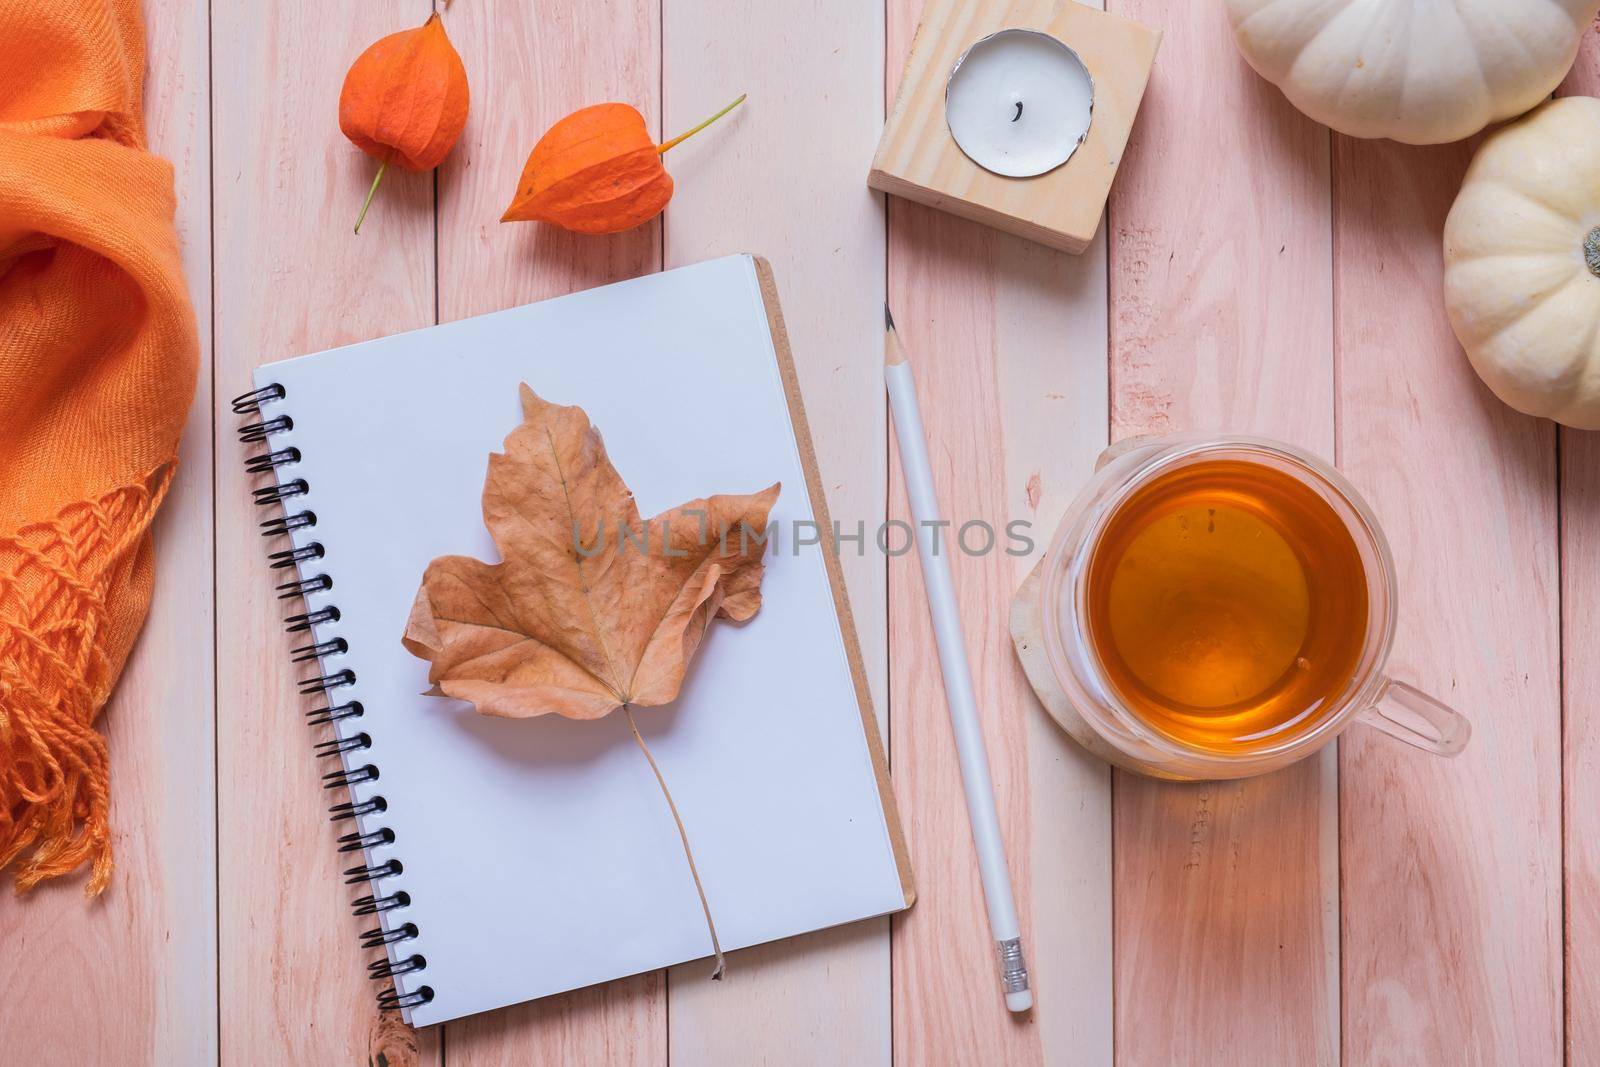 Fallen leaf and autumn cozy decor and pumpkins top view on wooden table.